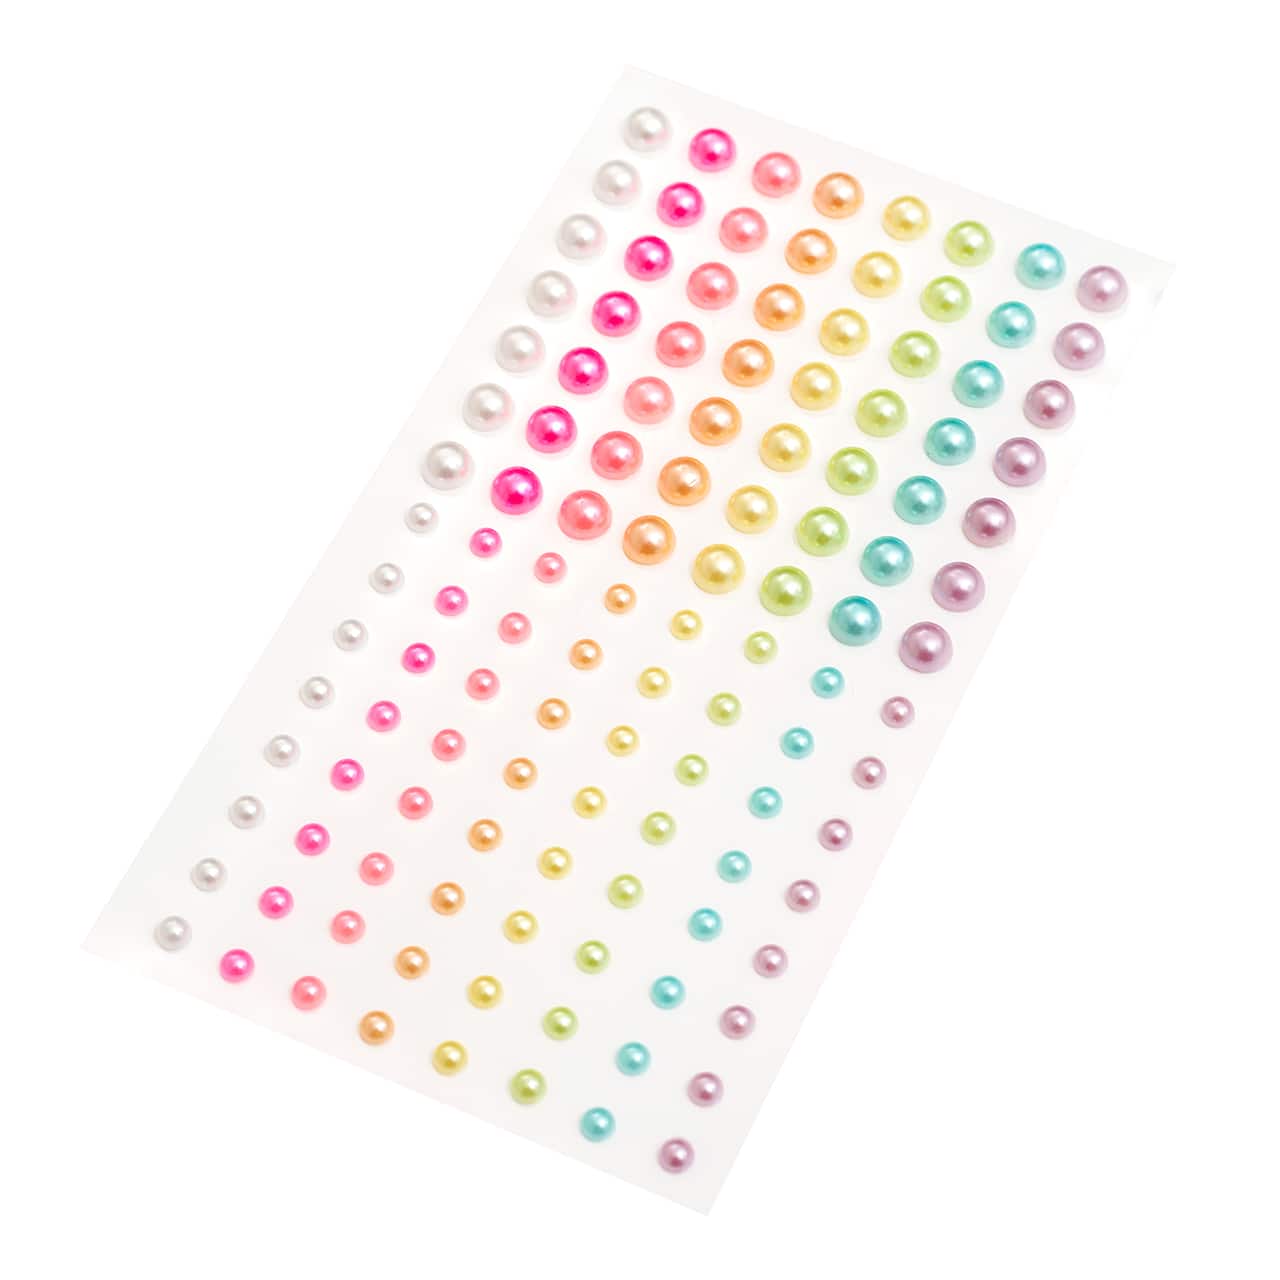 12 Packs: 120 ct. (1,440 total) Multicolor Pearl Stickers by Recollections™